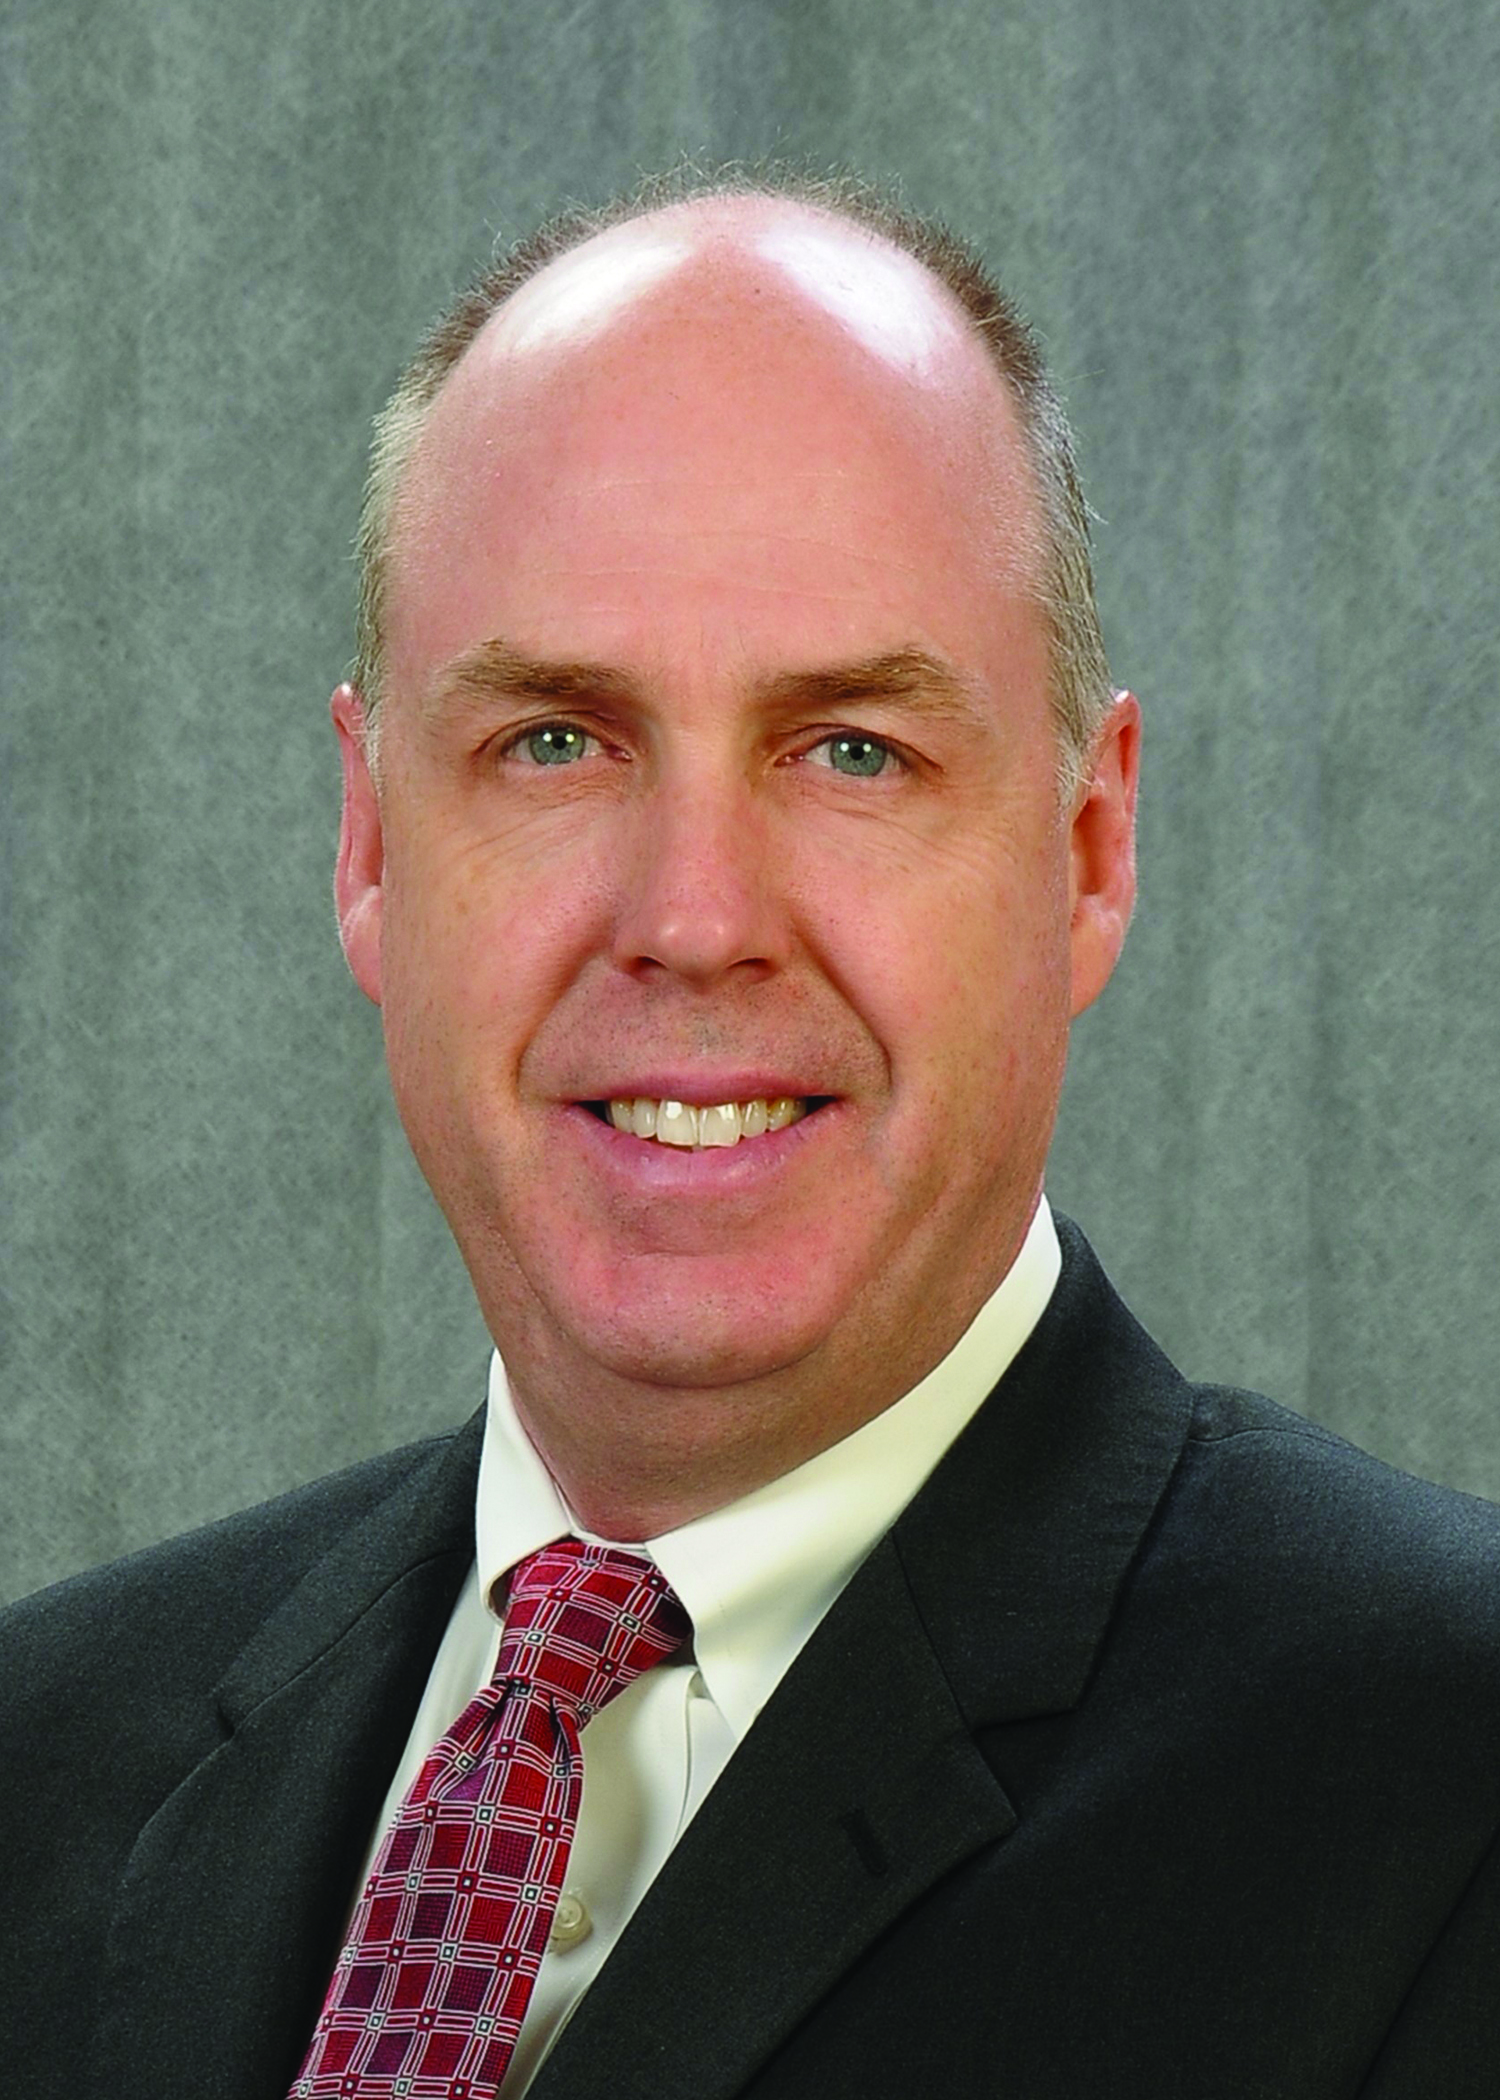 Tim Swanson, newly appointed CEO of Bettcher Industries, Inc.